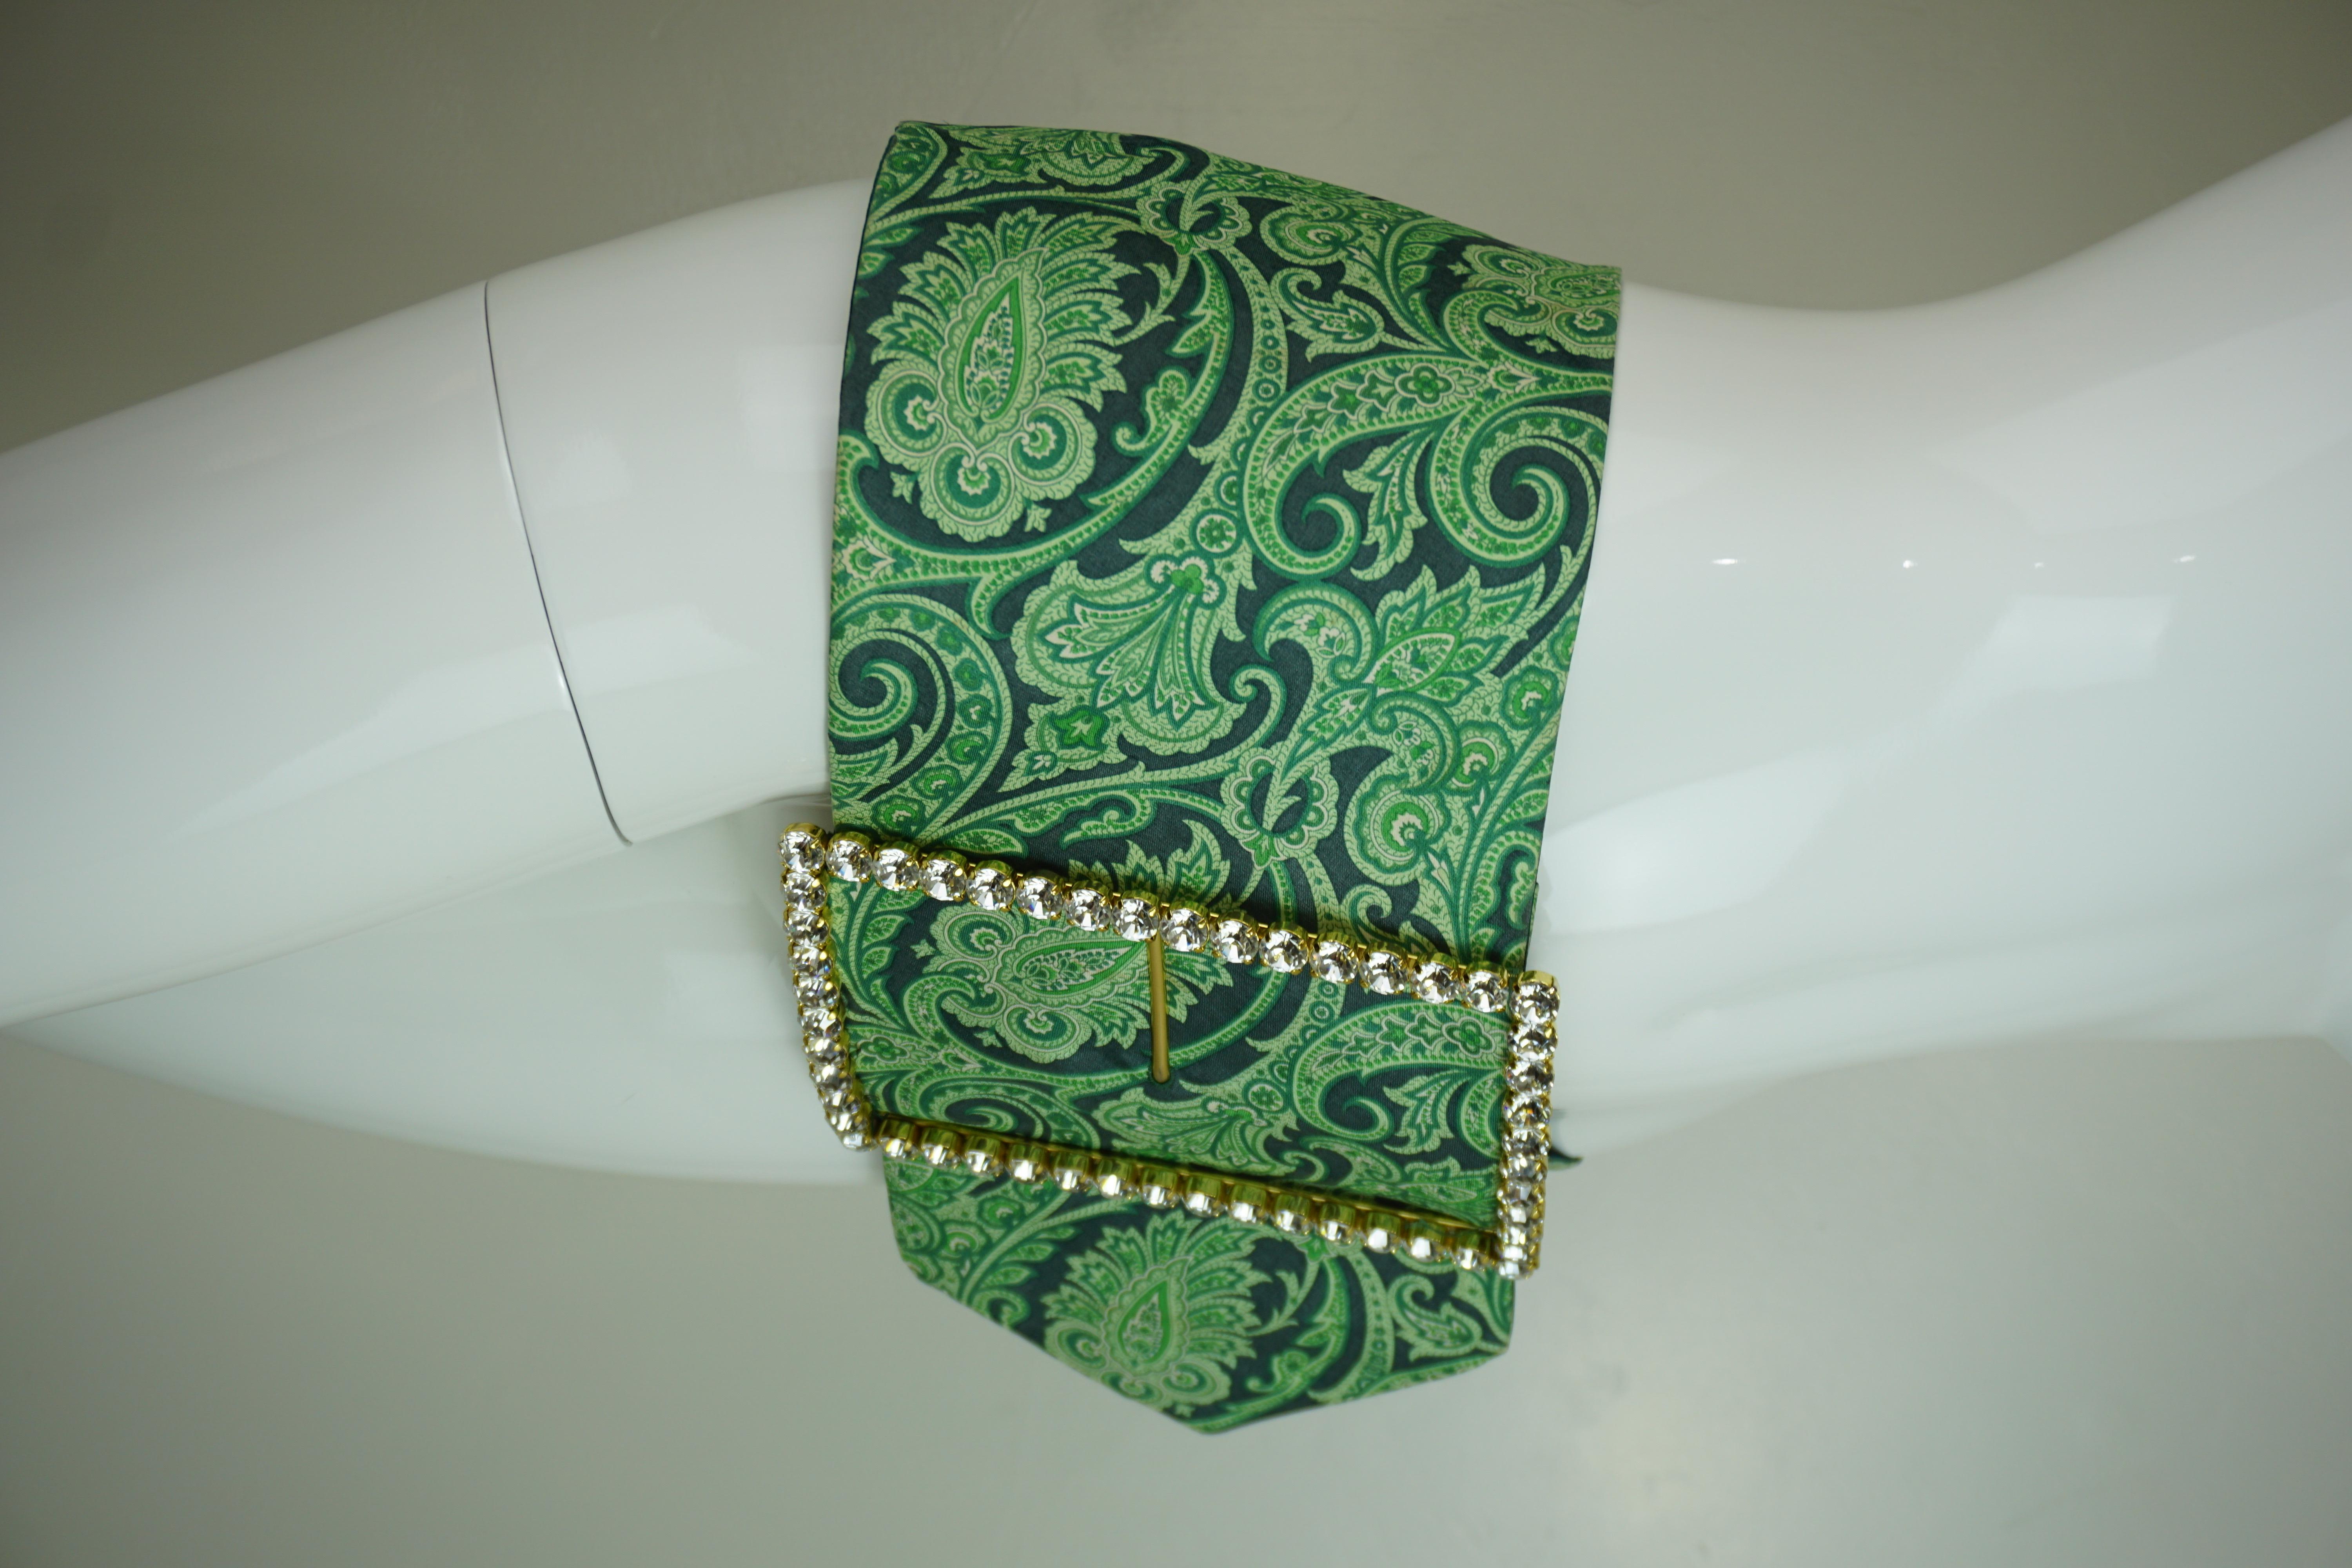 Dolce & Gabbana Size 40 Green Paisley Belt/Skirt S/S 2000 with Crystal Buckle

Foxy Couture is not an authorized reseller nor affiliated with any of the brands we sell.

International Buyers: Foxy Couture is not responsible for any customs or import